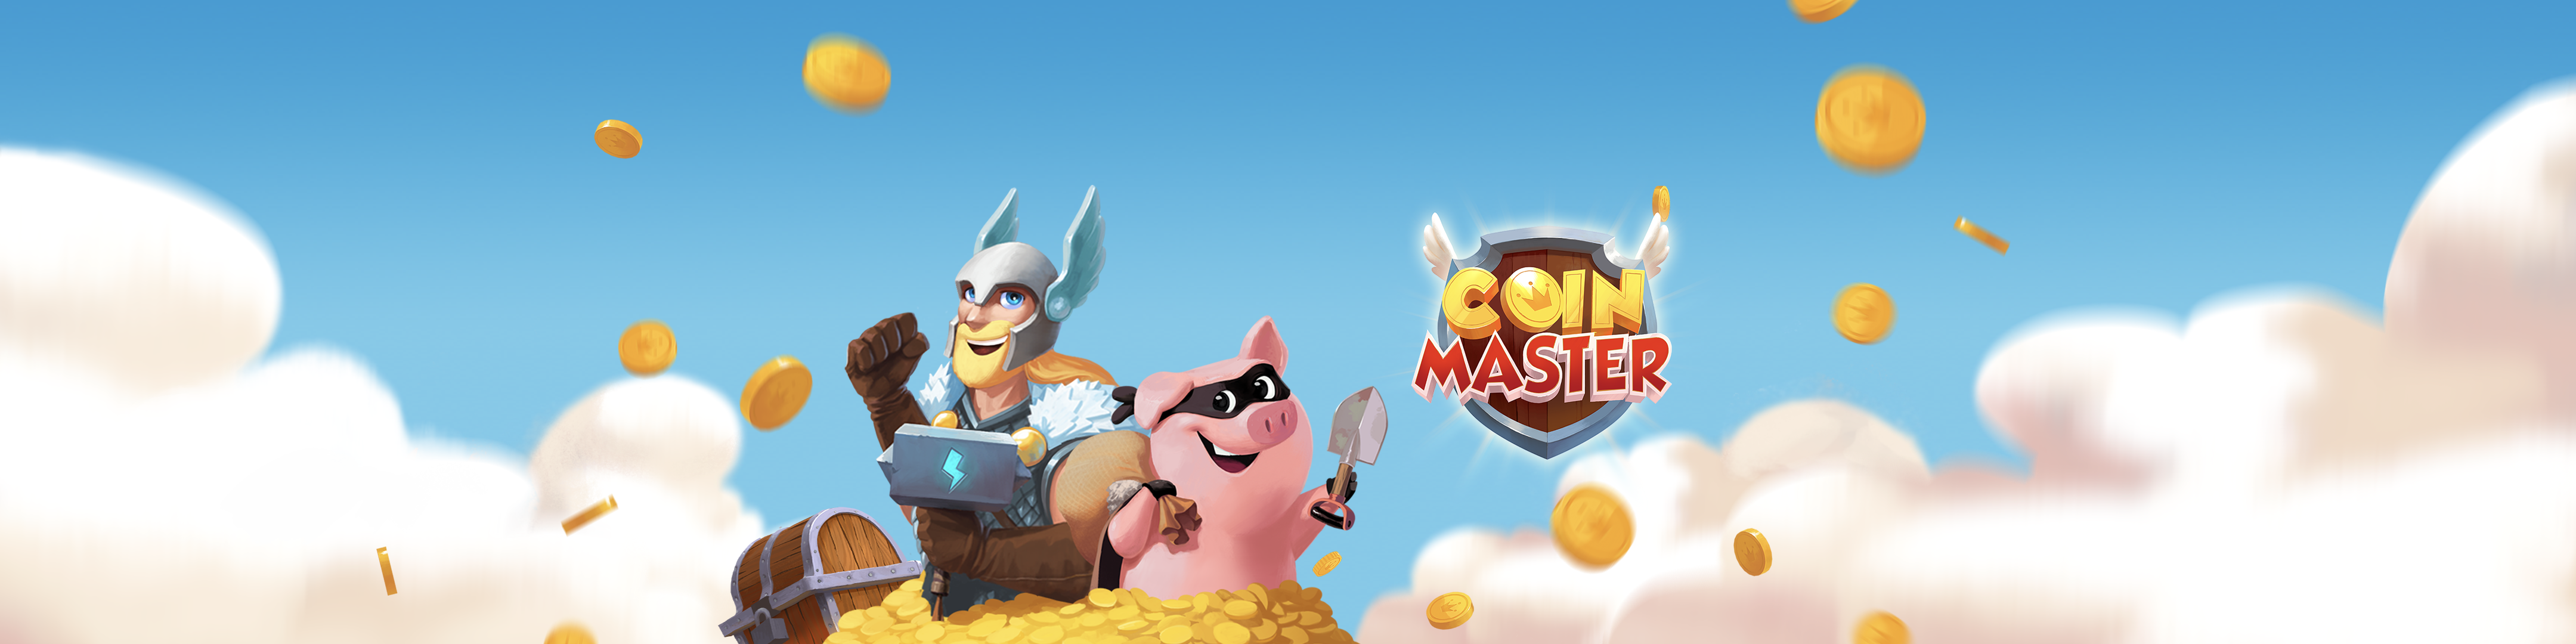 Coin Master Overview Apple App Store Germany